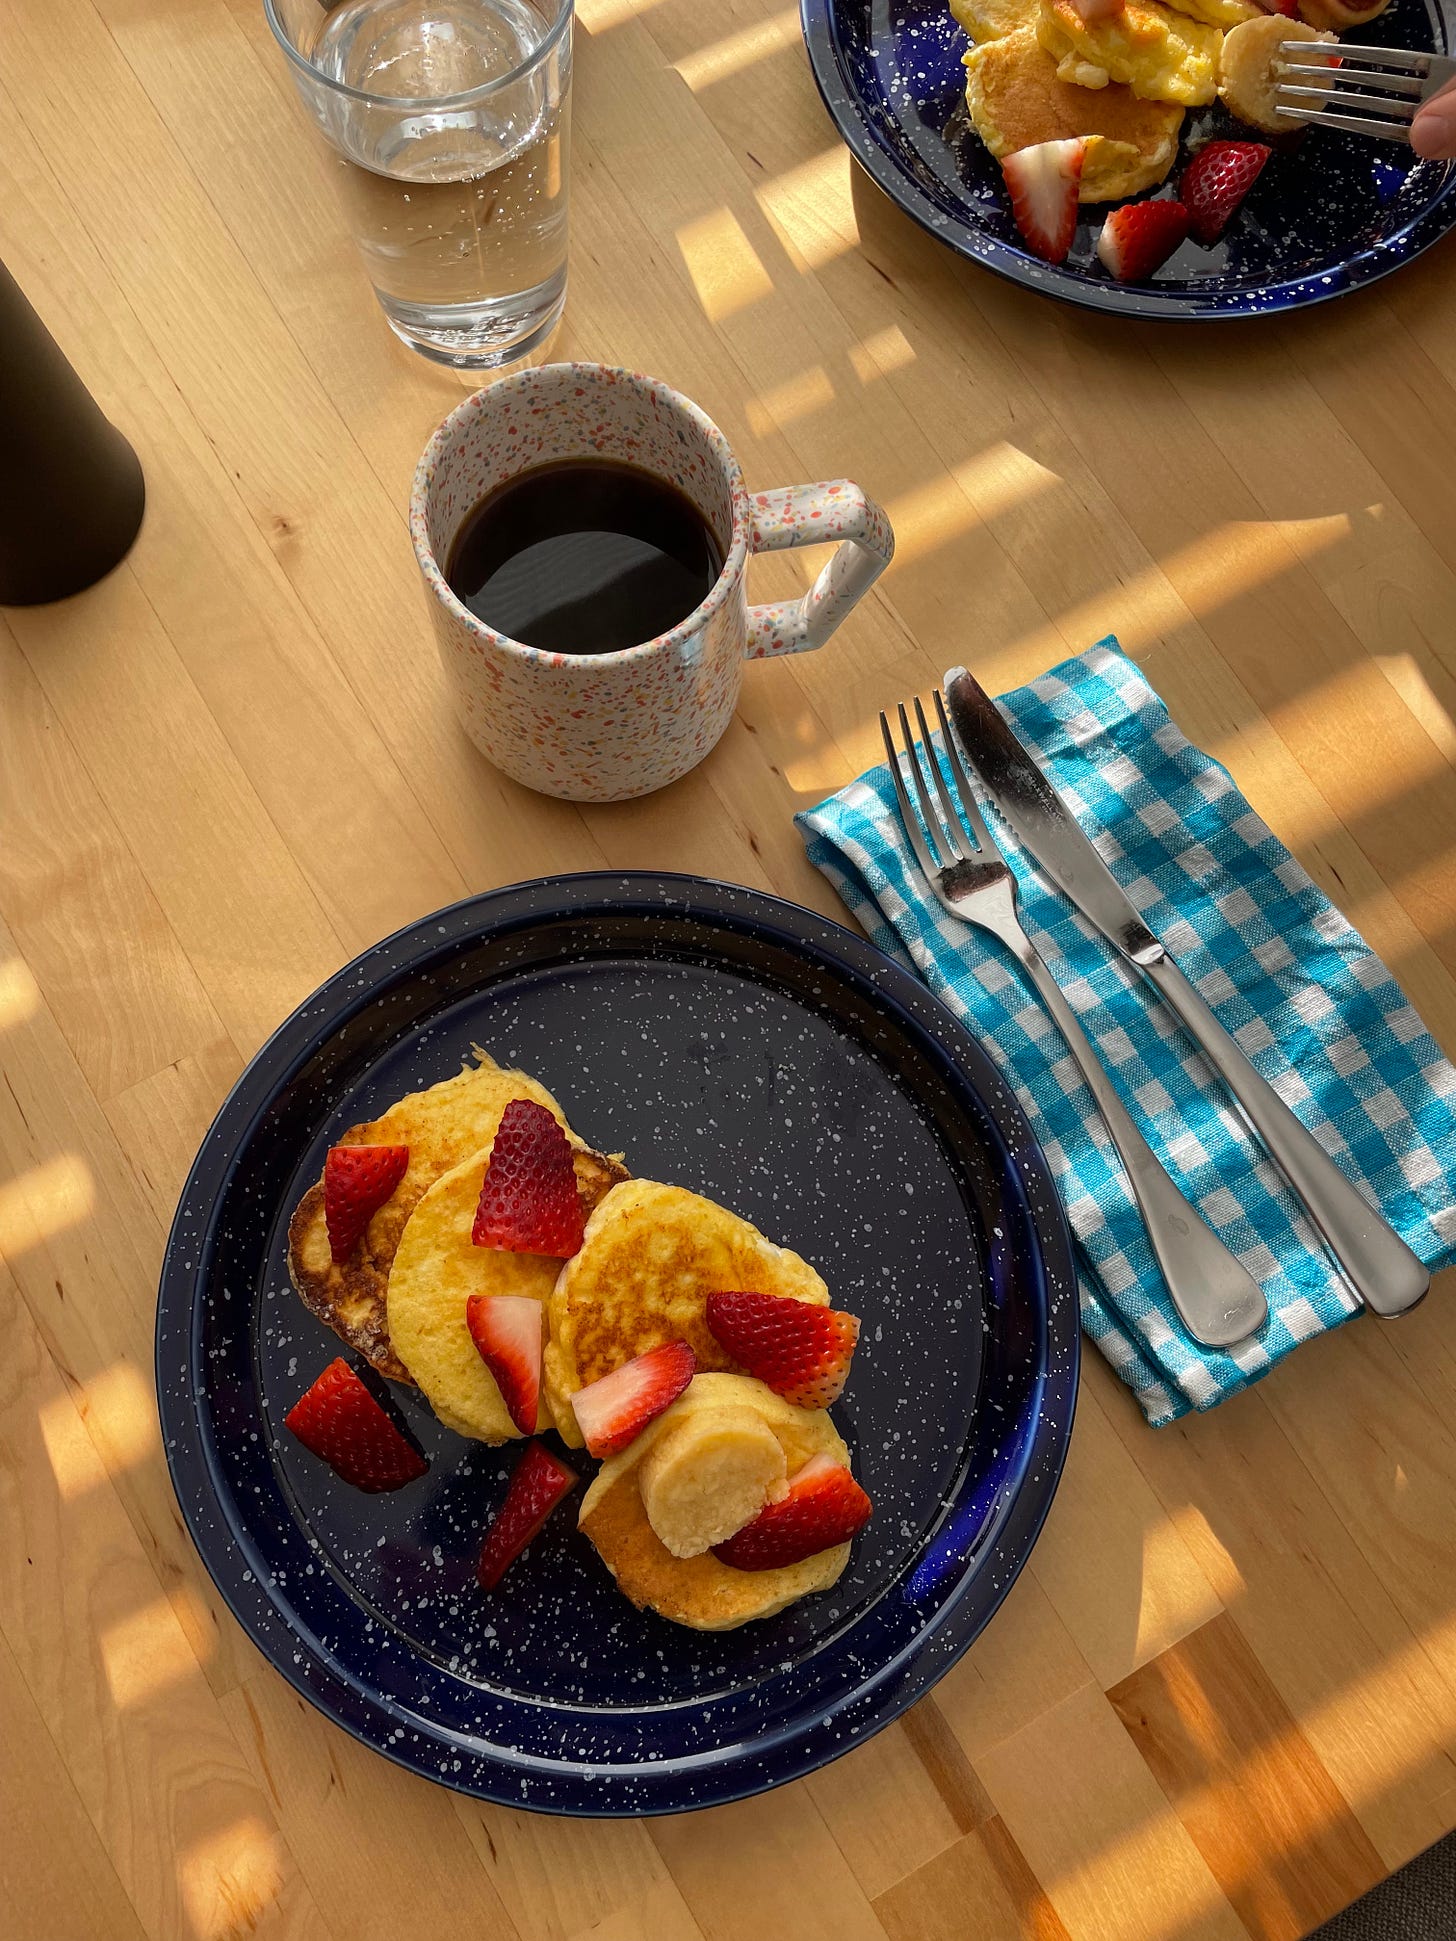 Speckled plate with four mini ricotta hotcakes, sliced strawberries sprinkled on top. A slice of honeycomb butter is on the plate. There is a cup of filter coffee on the table and a blue and white gingham napkin.